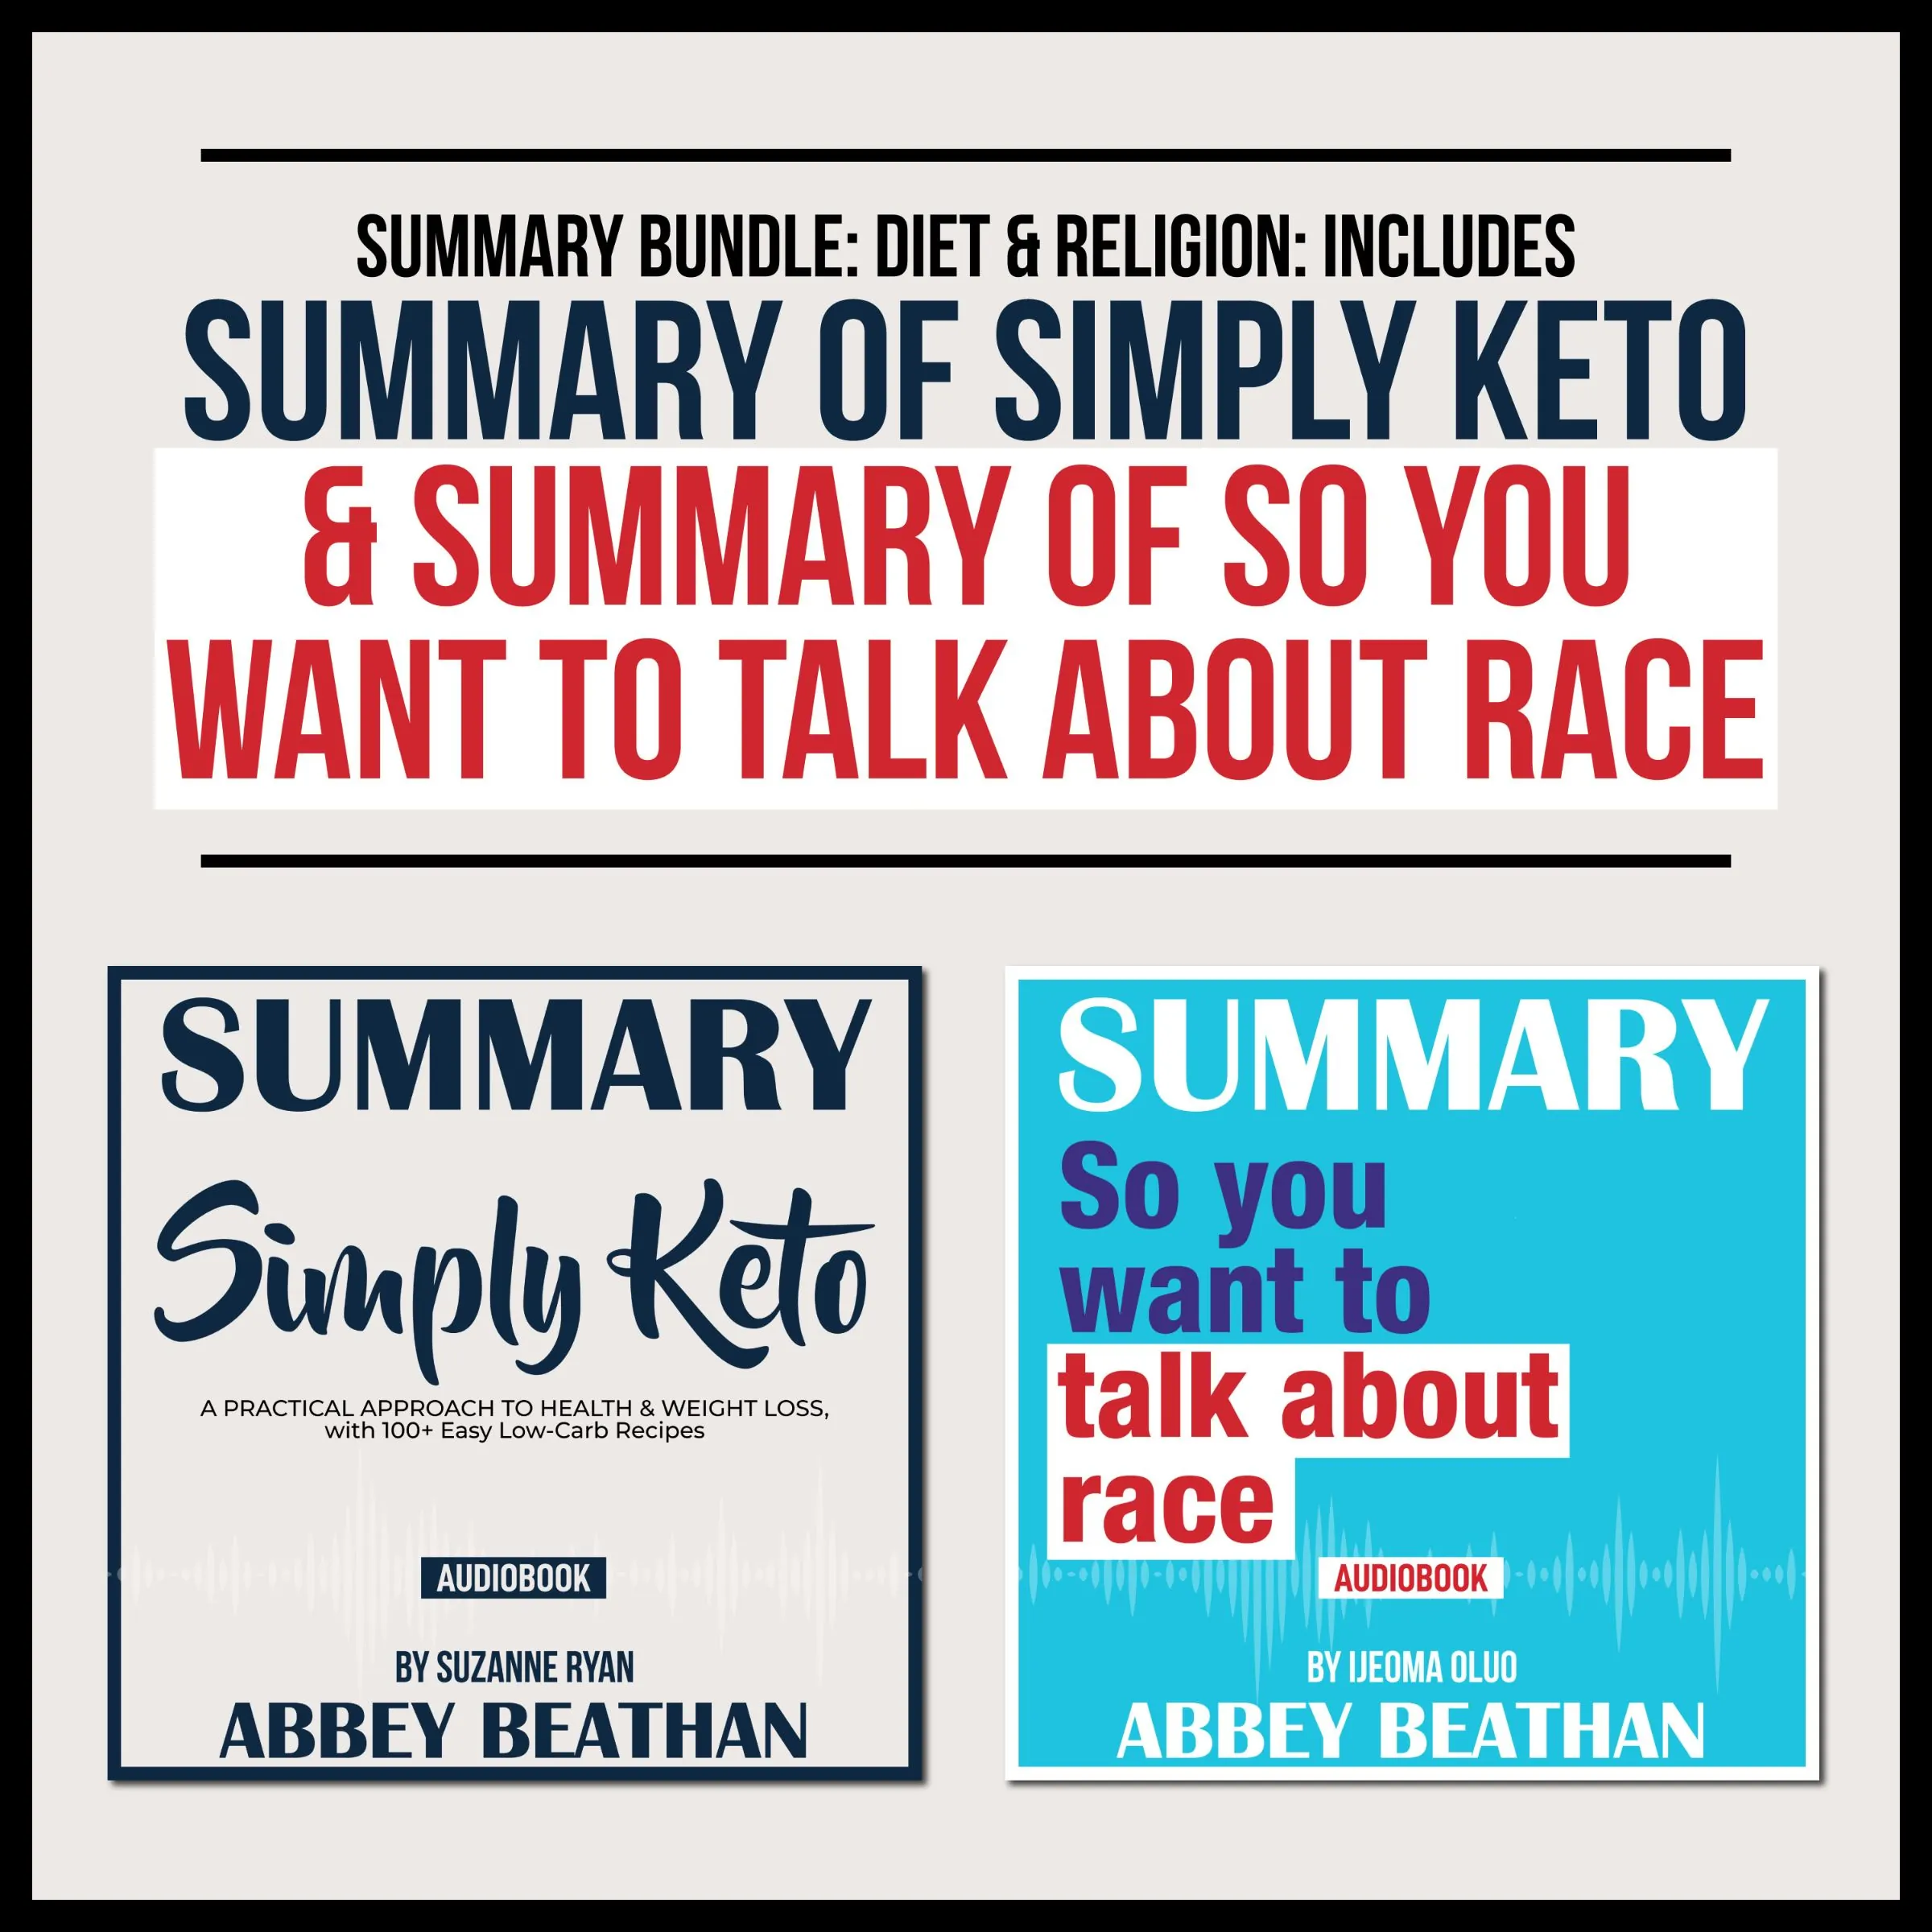 Summary Bundle: Diet &amp; Religion: Includes Summary of Simply Keto &amp; Summary of So You Want to Talk About Race Audiobook by Abbey Beathan